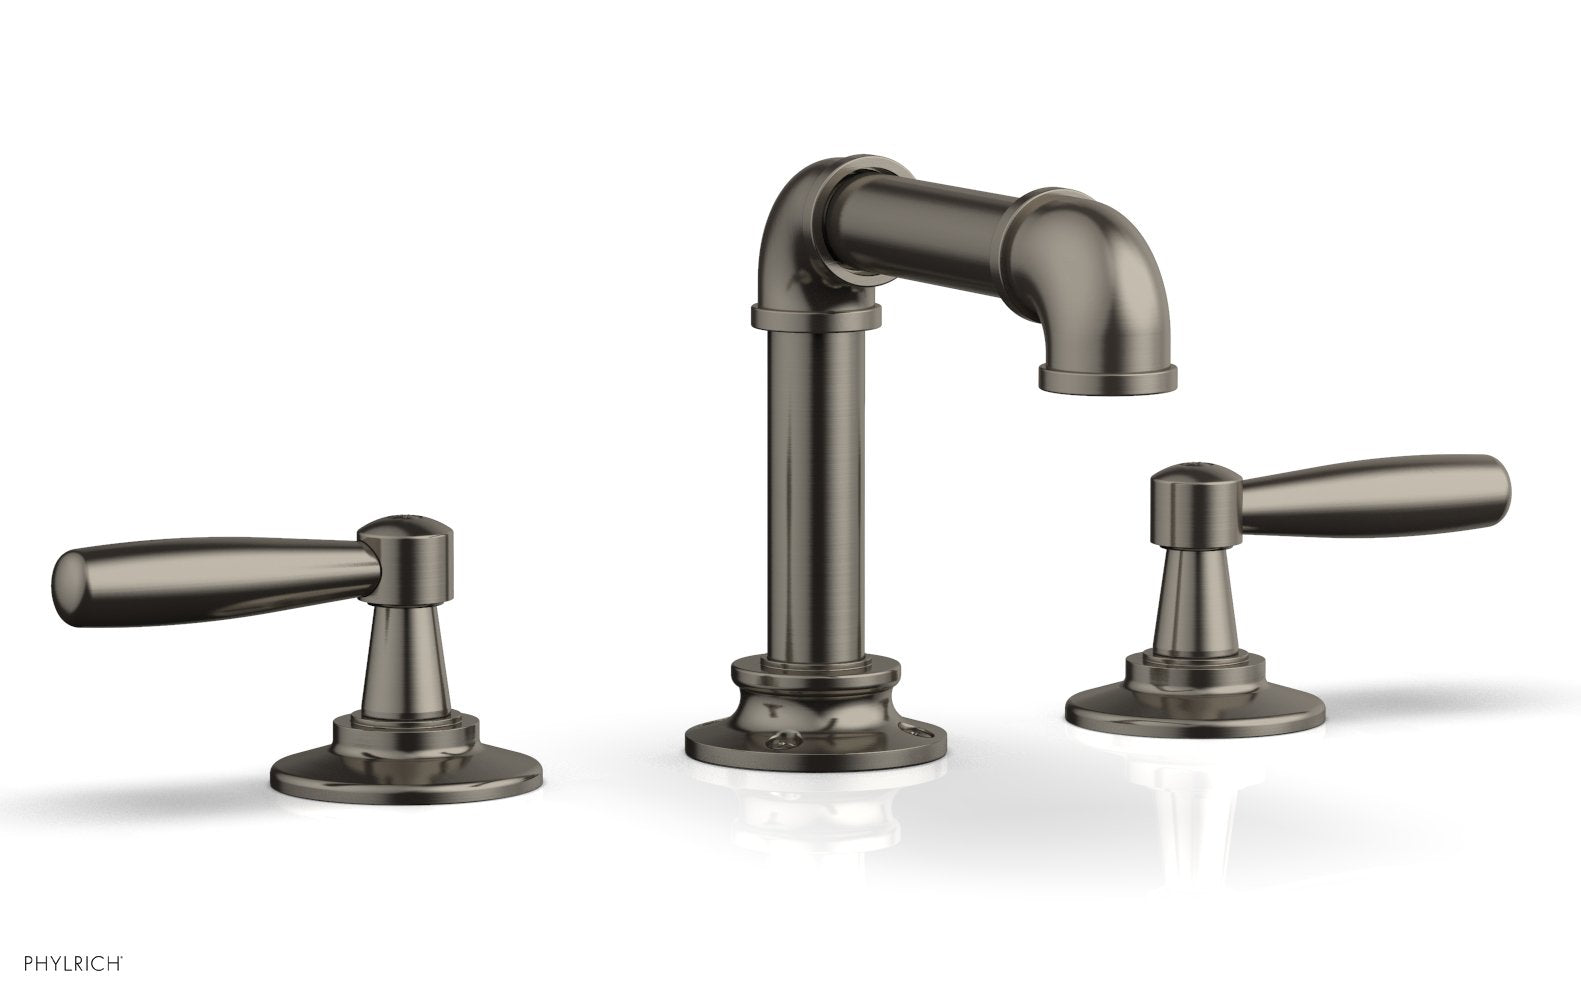 Phylrich WORKS 2 Widespread Faucet - Low Spout